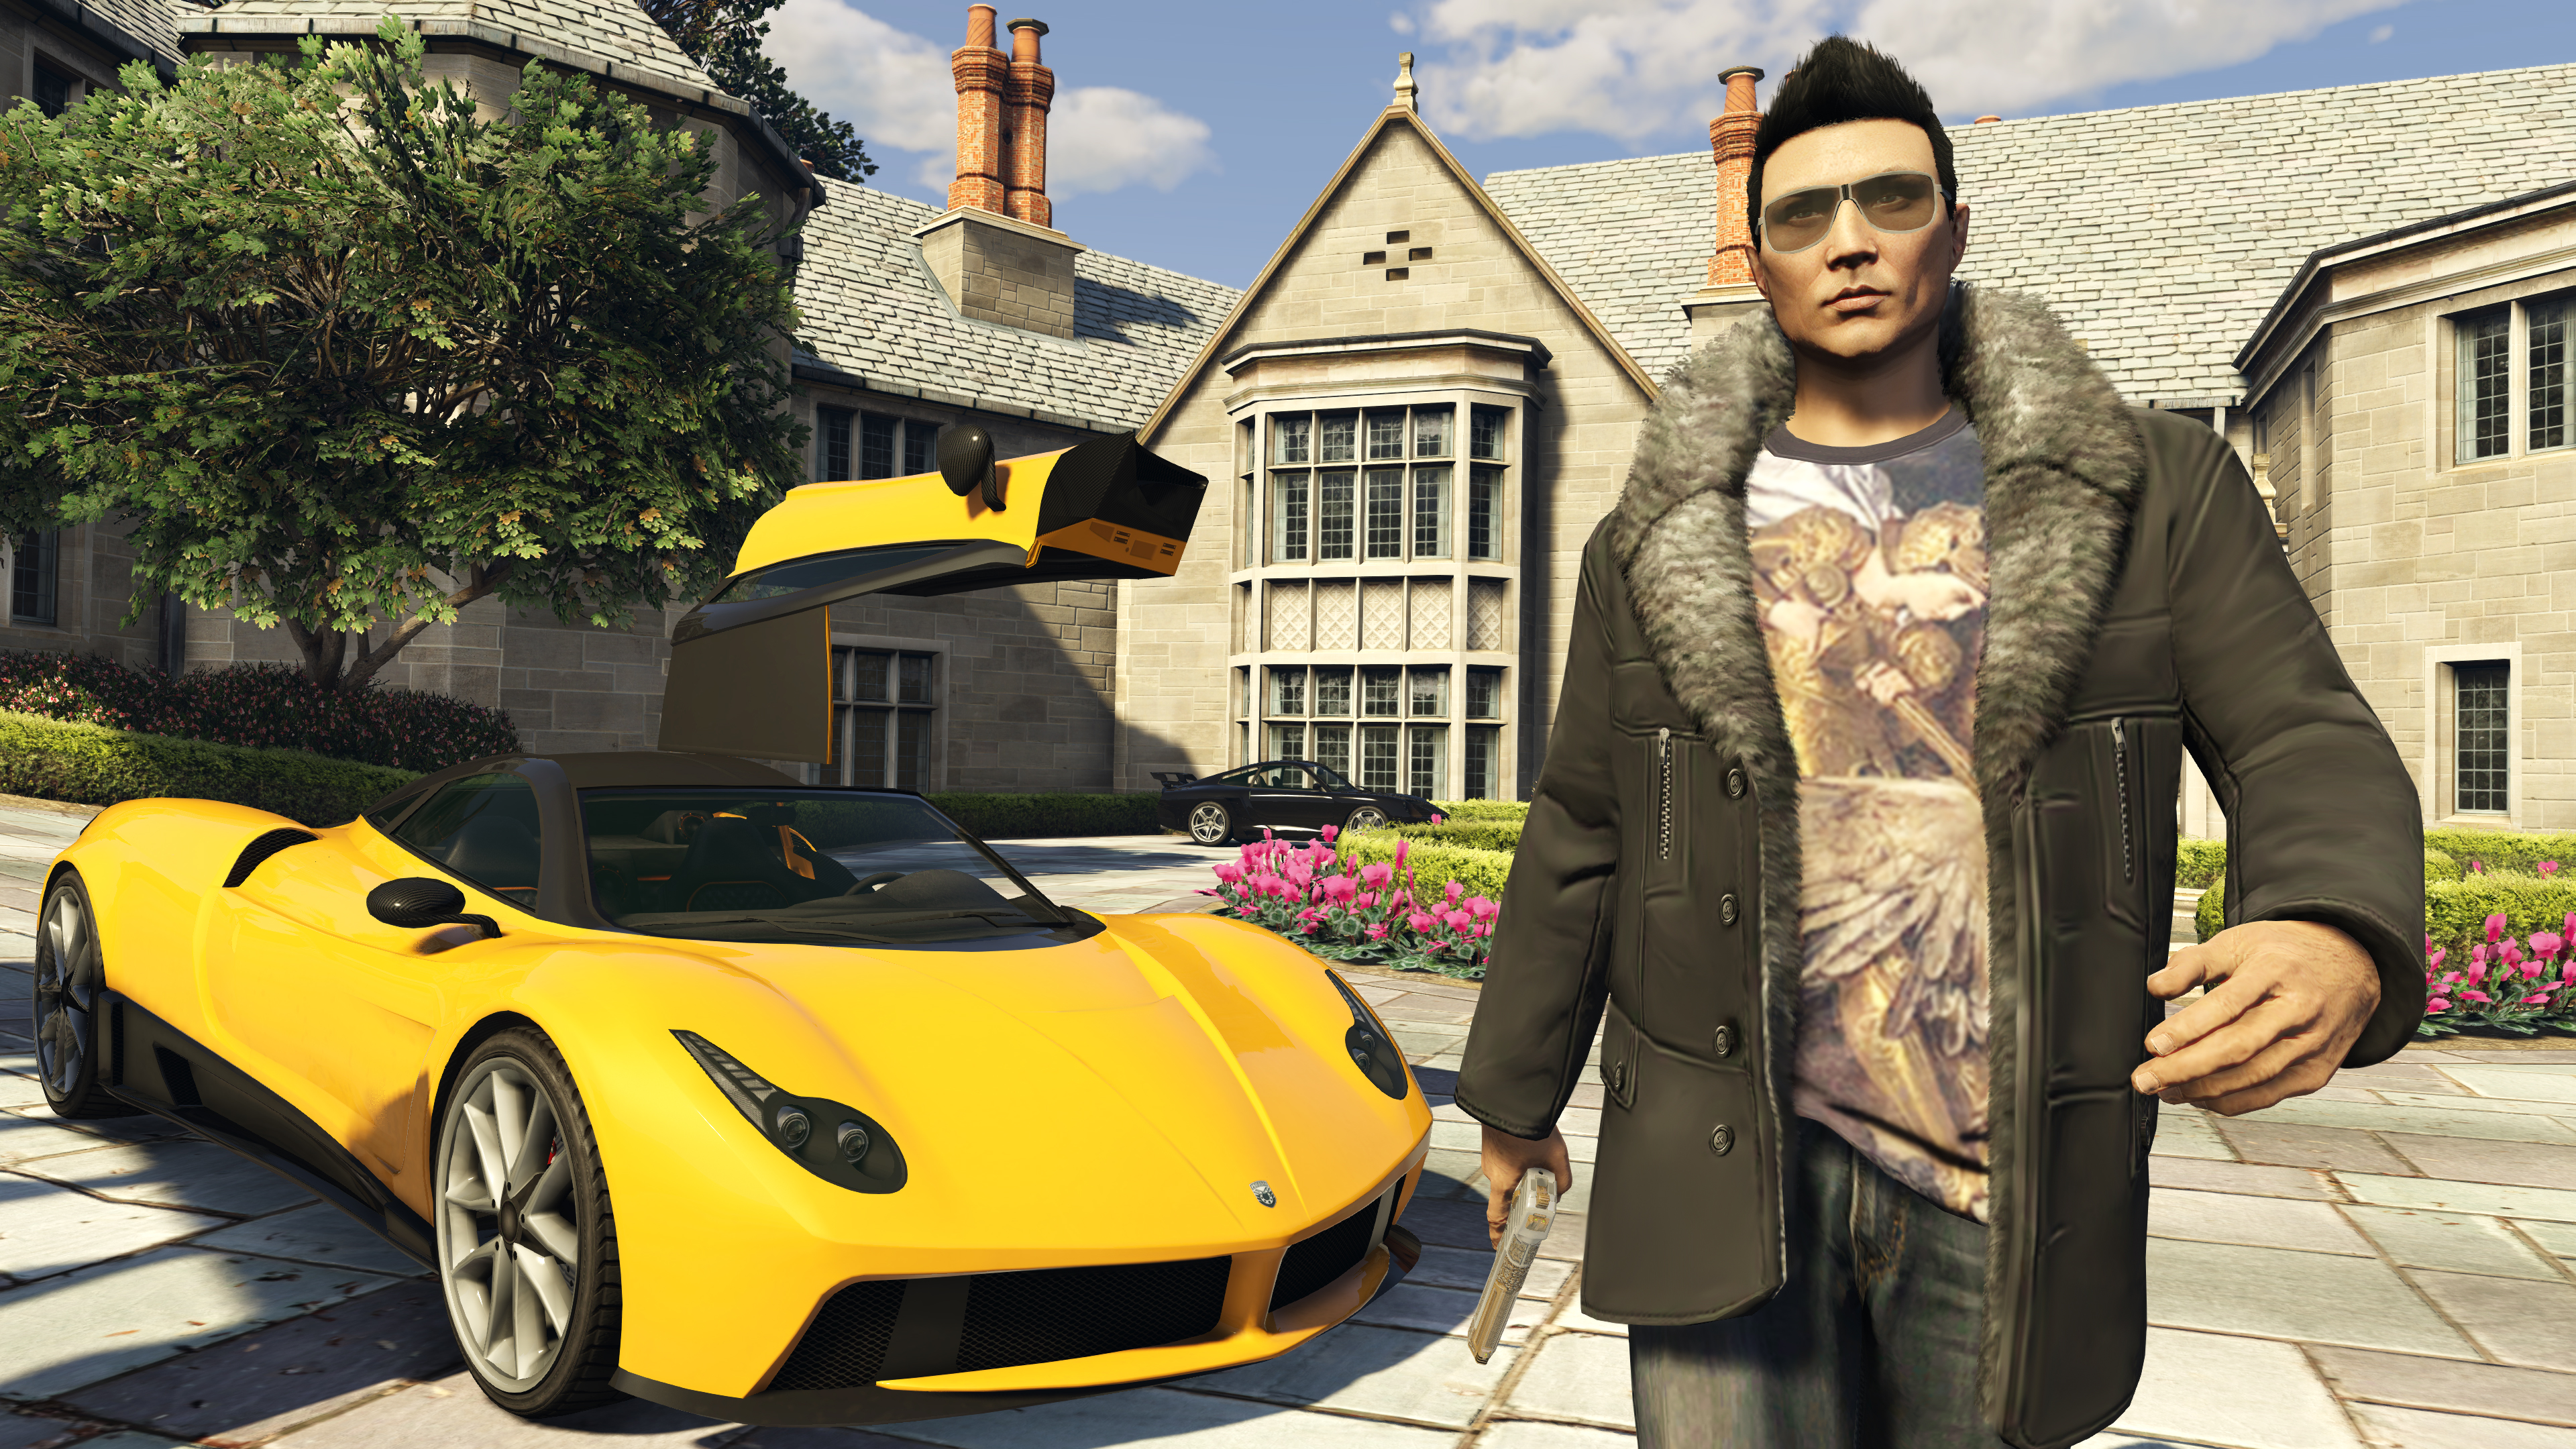 GTA V - Checking Out Liveries & Paint For The Windsor - LegacyRP 